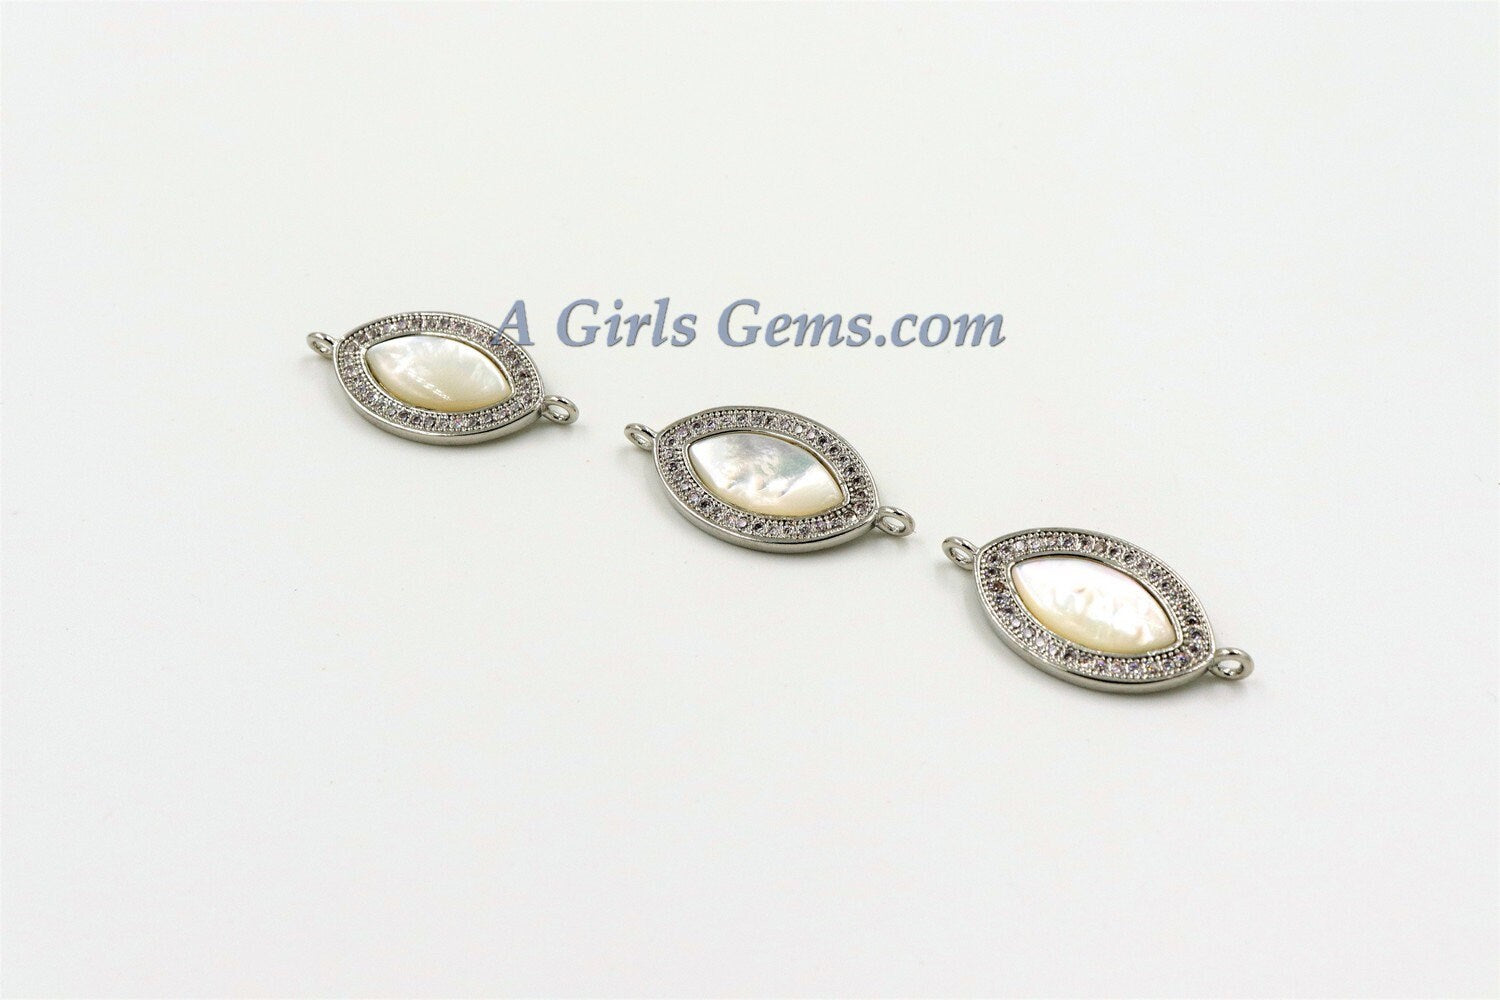 CZ Micro Pave Pearl Connectors, Mother of Pearl Silver Evil Eye Charm #74, 14 x 24 mm Silver Pearl Charm Beads/CZ Necklace Connector charm